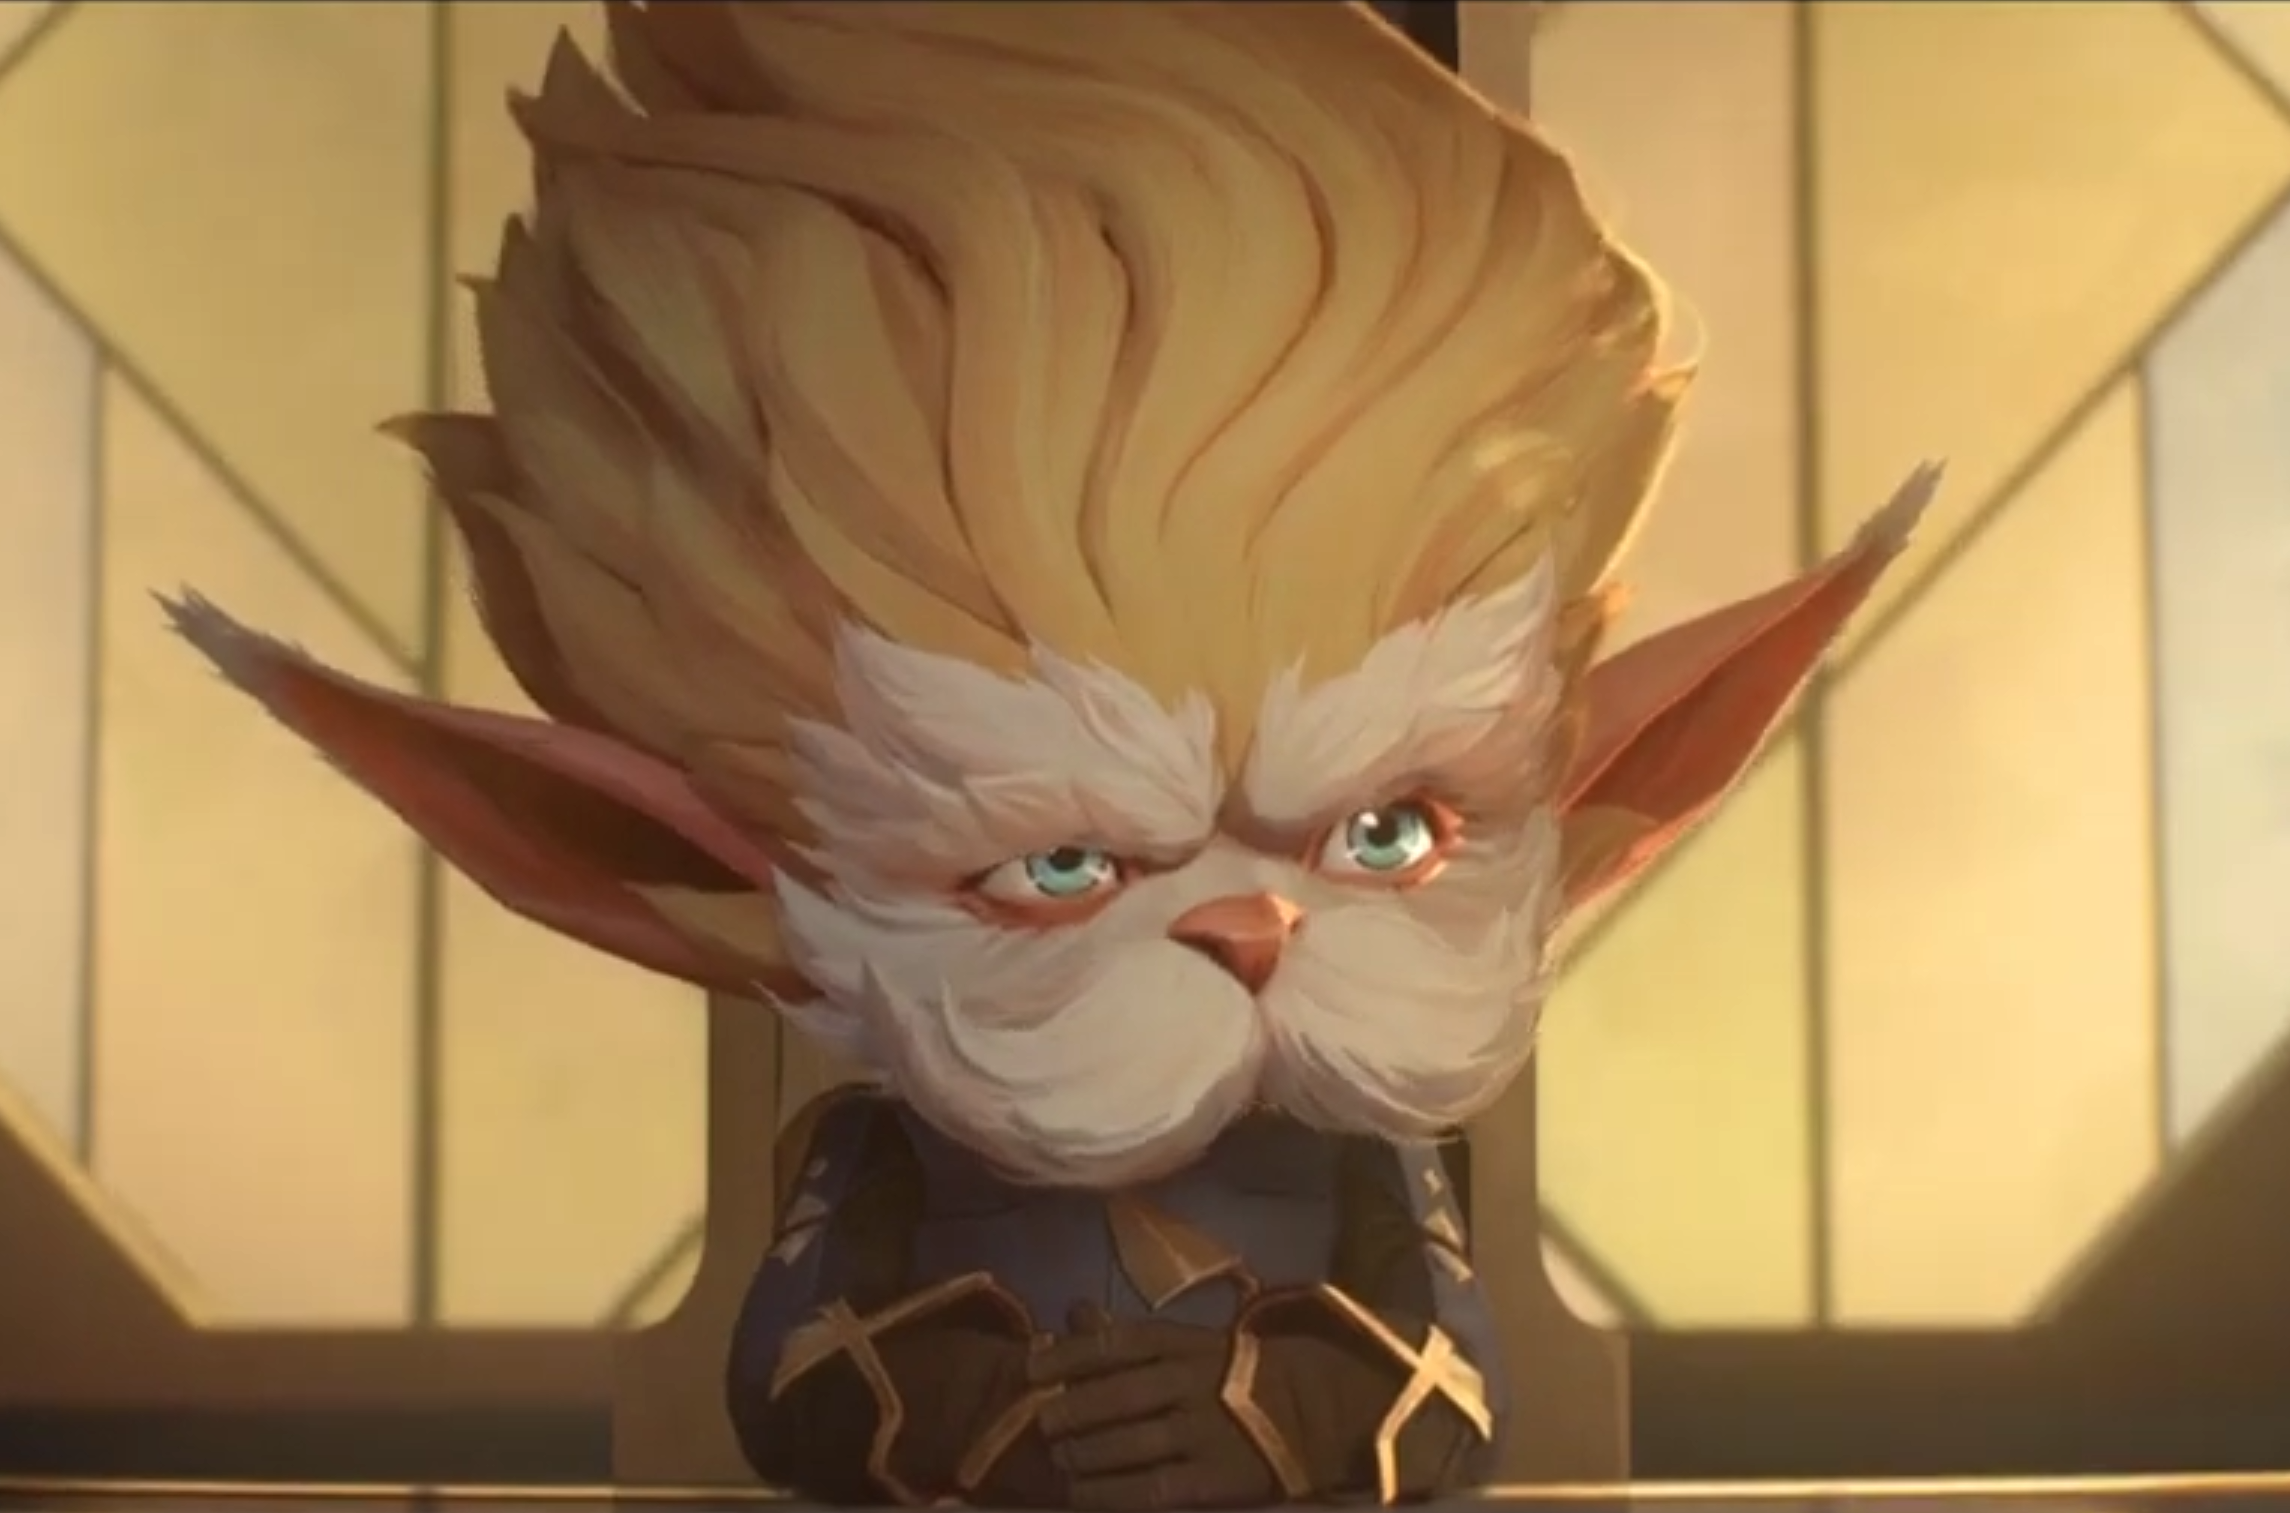 Heimerdinger is sitting and has a concerned expression.